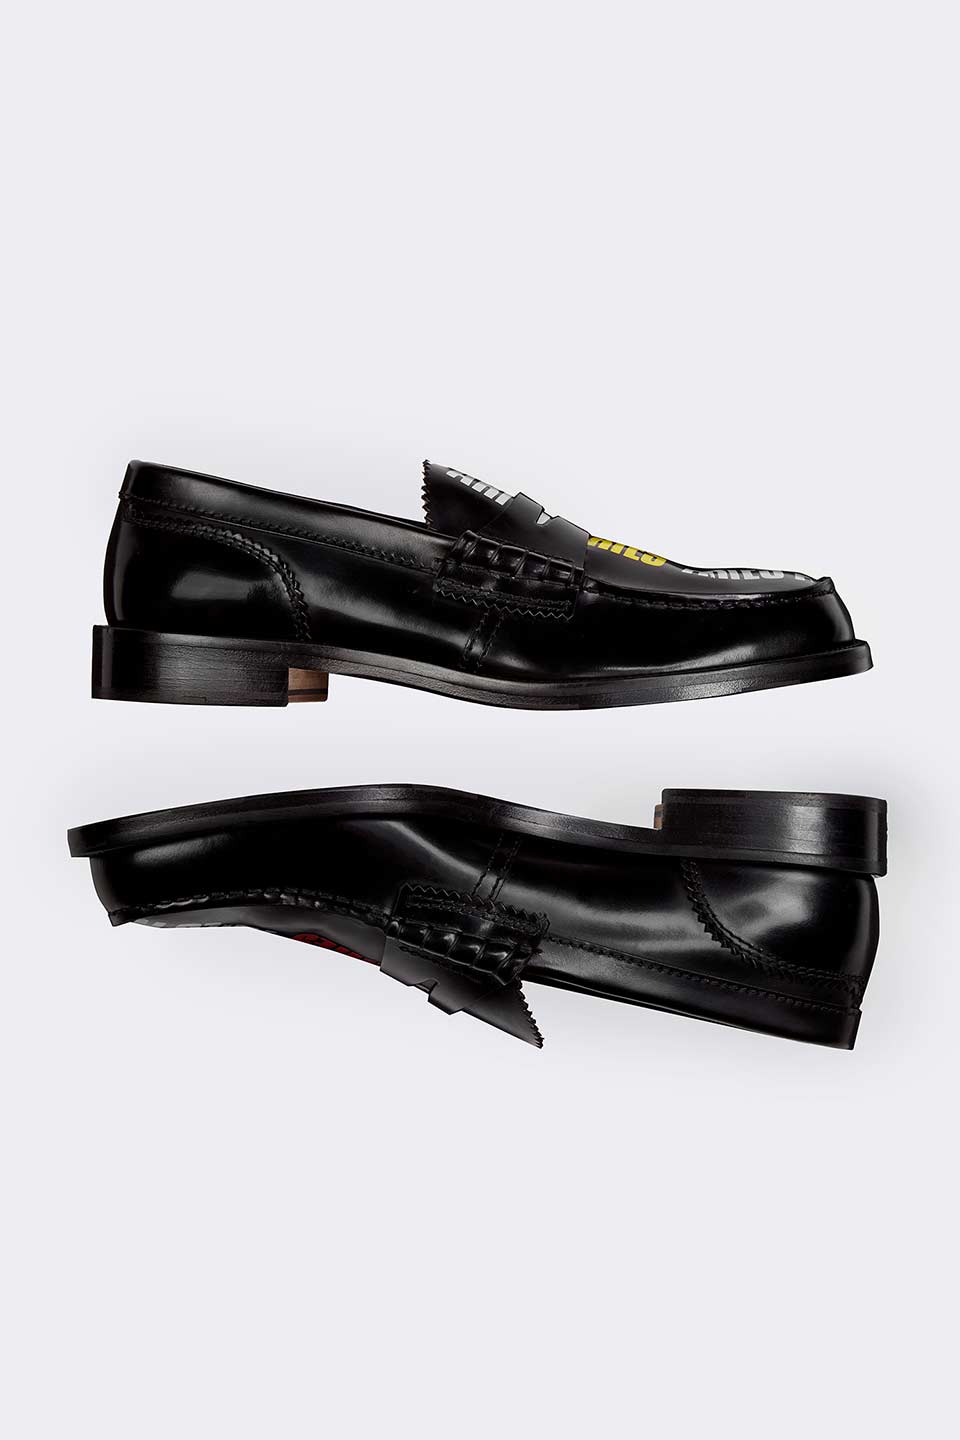 college aries antick loafer release date price loafers